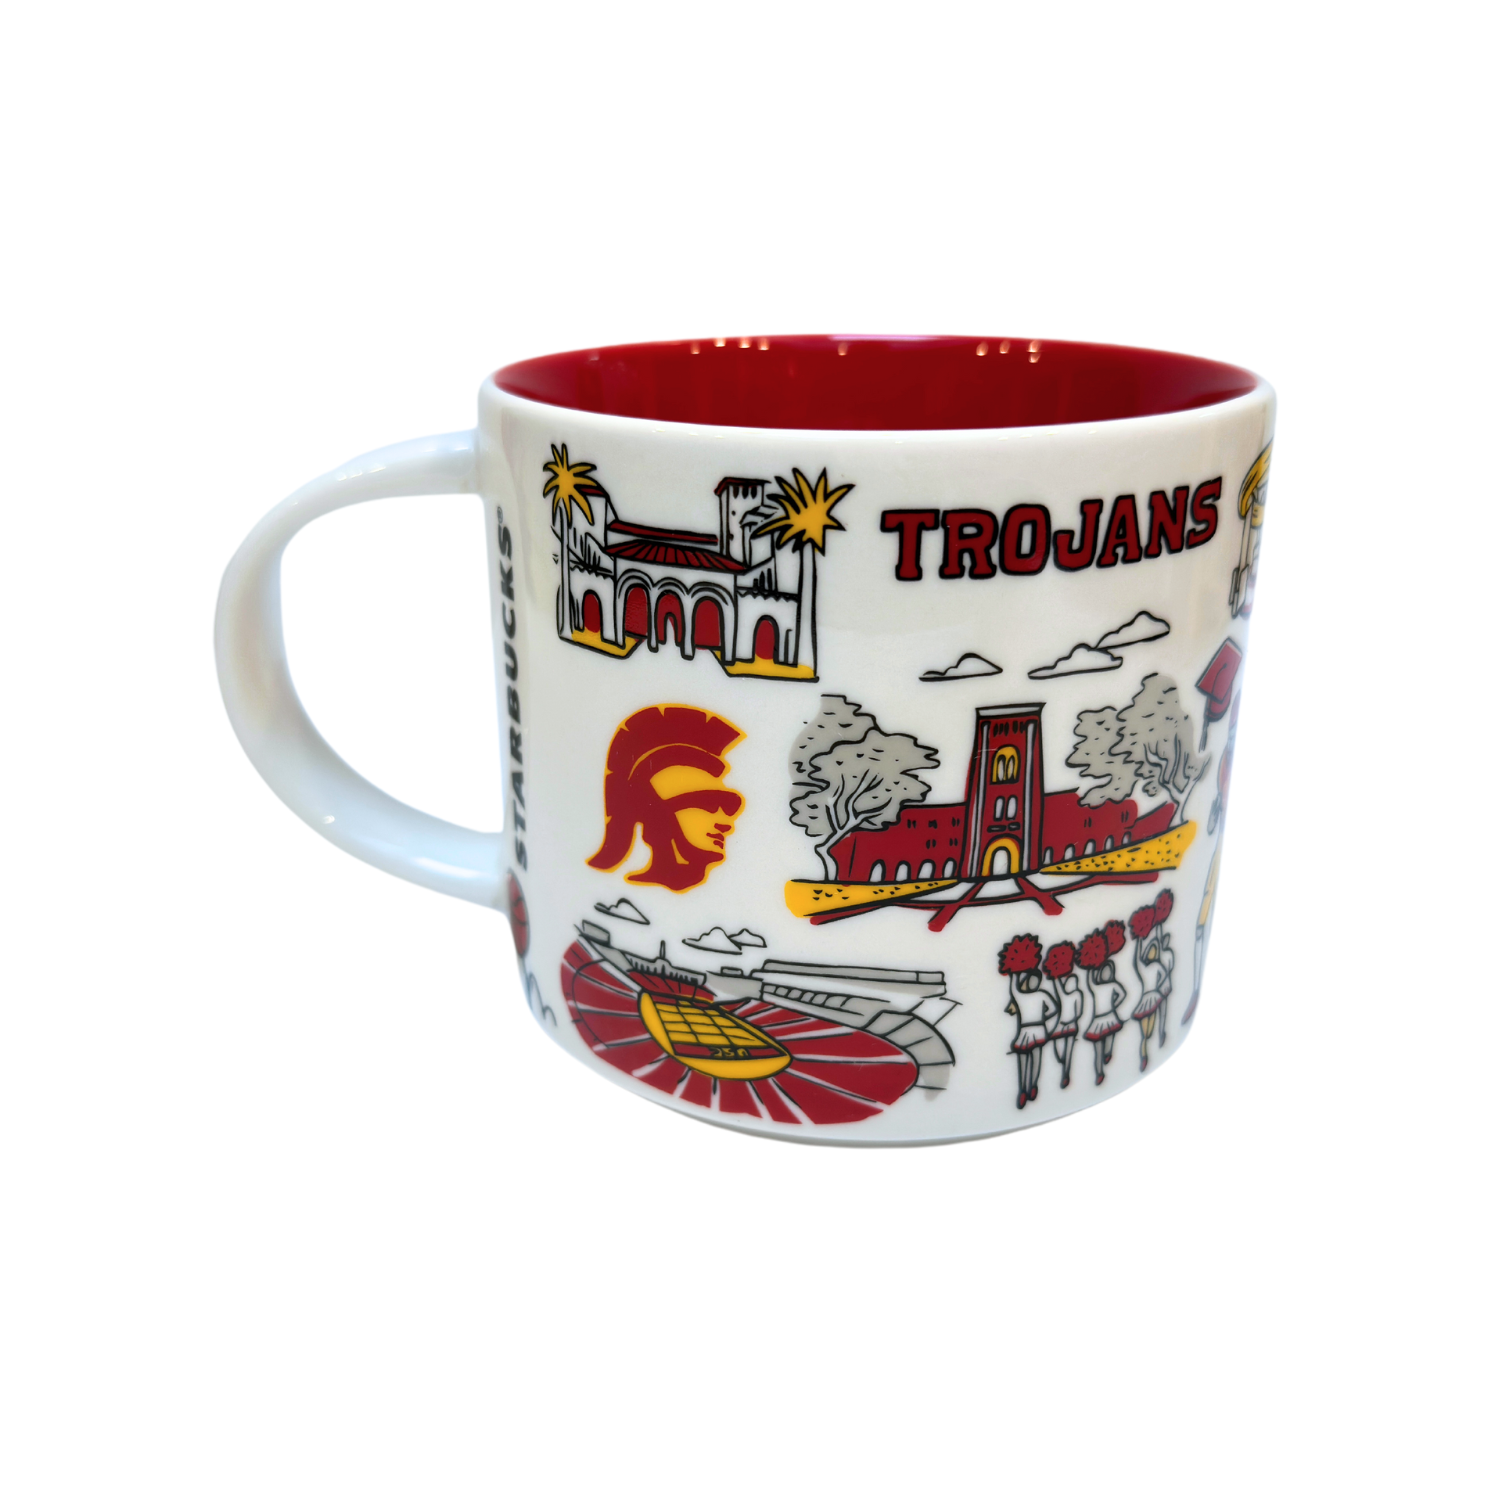 Starbucks Been There Series Campus Collection University of Southern California Ceramic Mug, 14 Oz